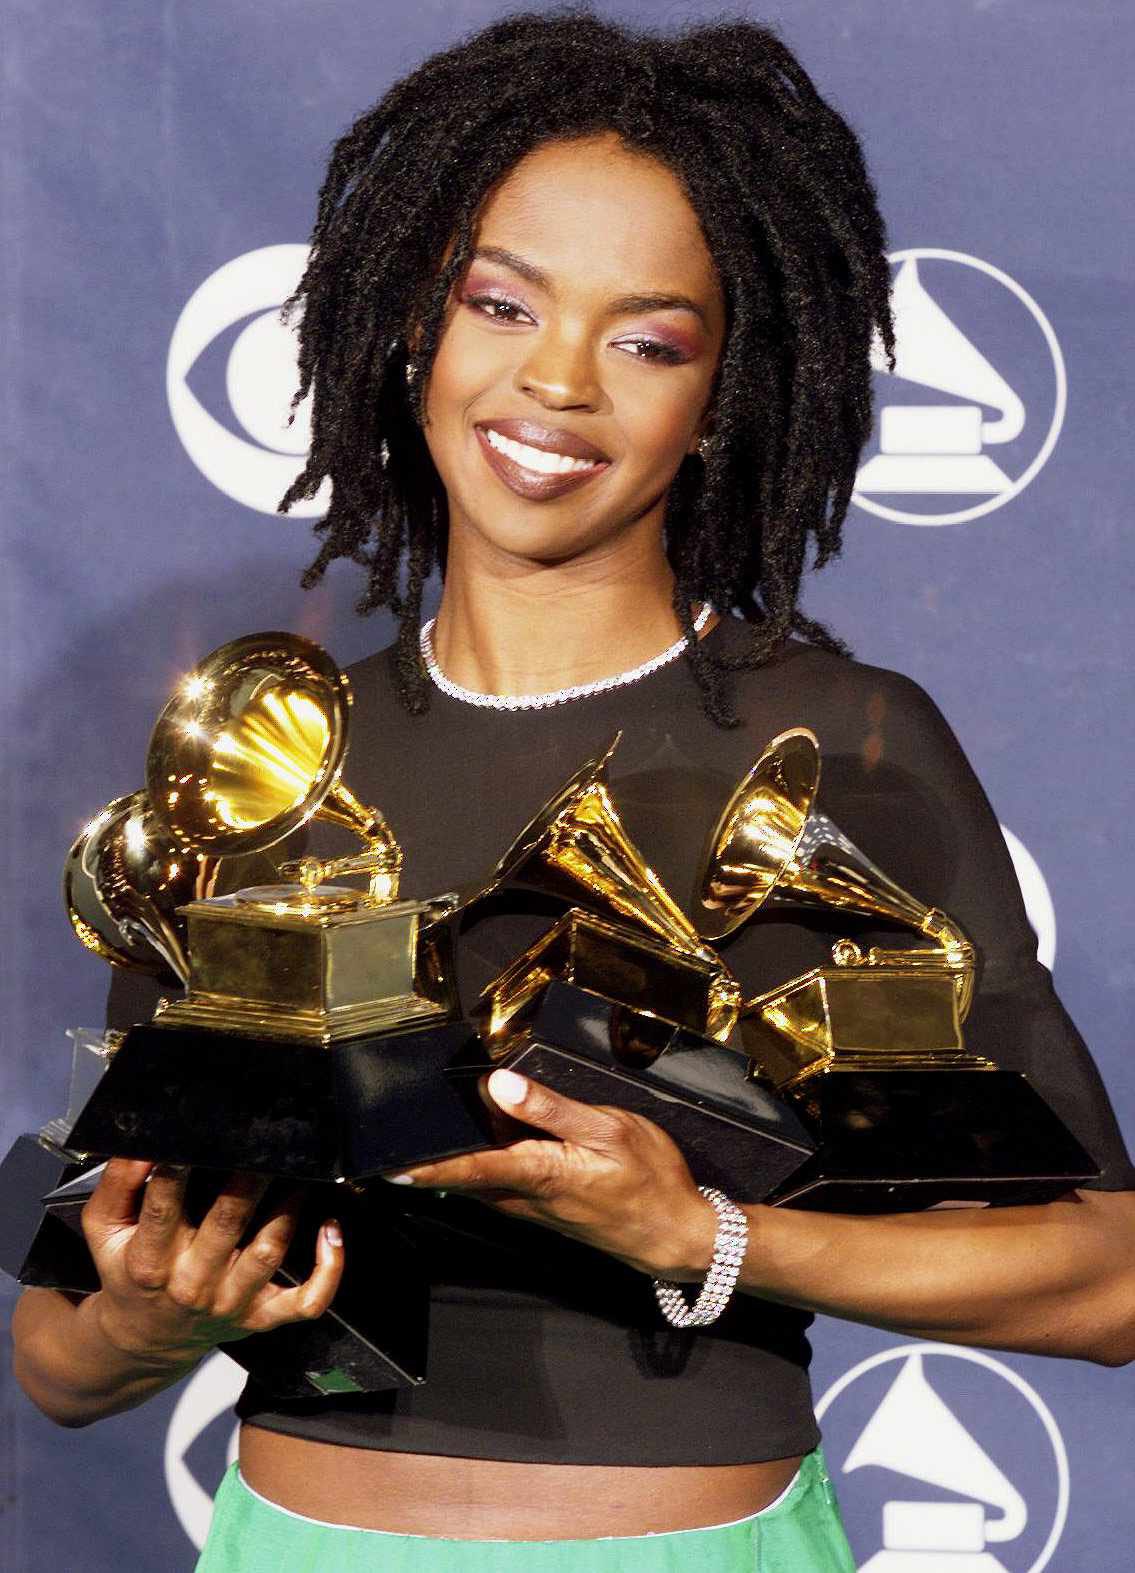 Happy Birthday to the 8-time GRAMMY Award winner, Ms. Lauryn Hill, who turns 48 today 